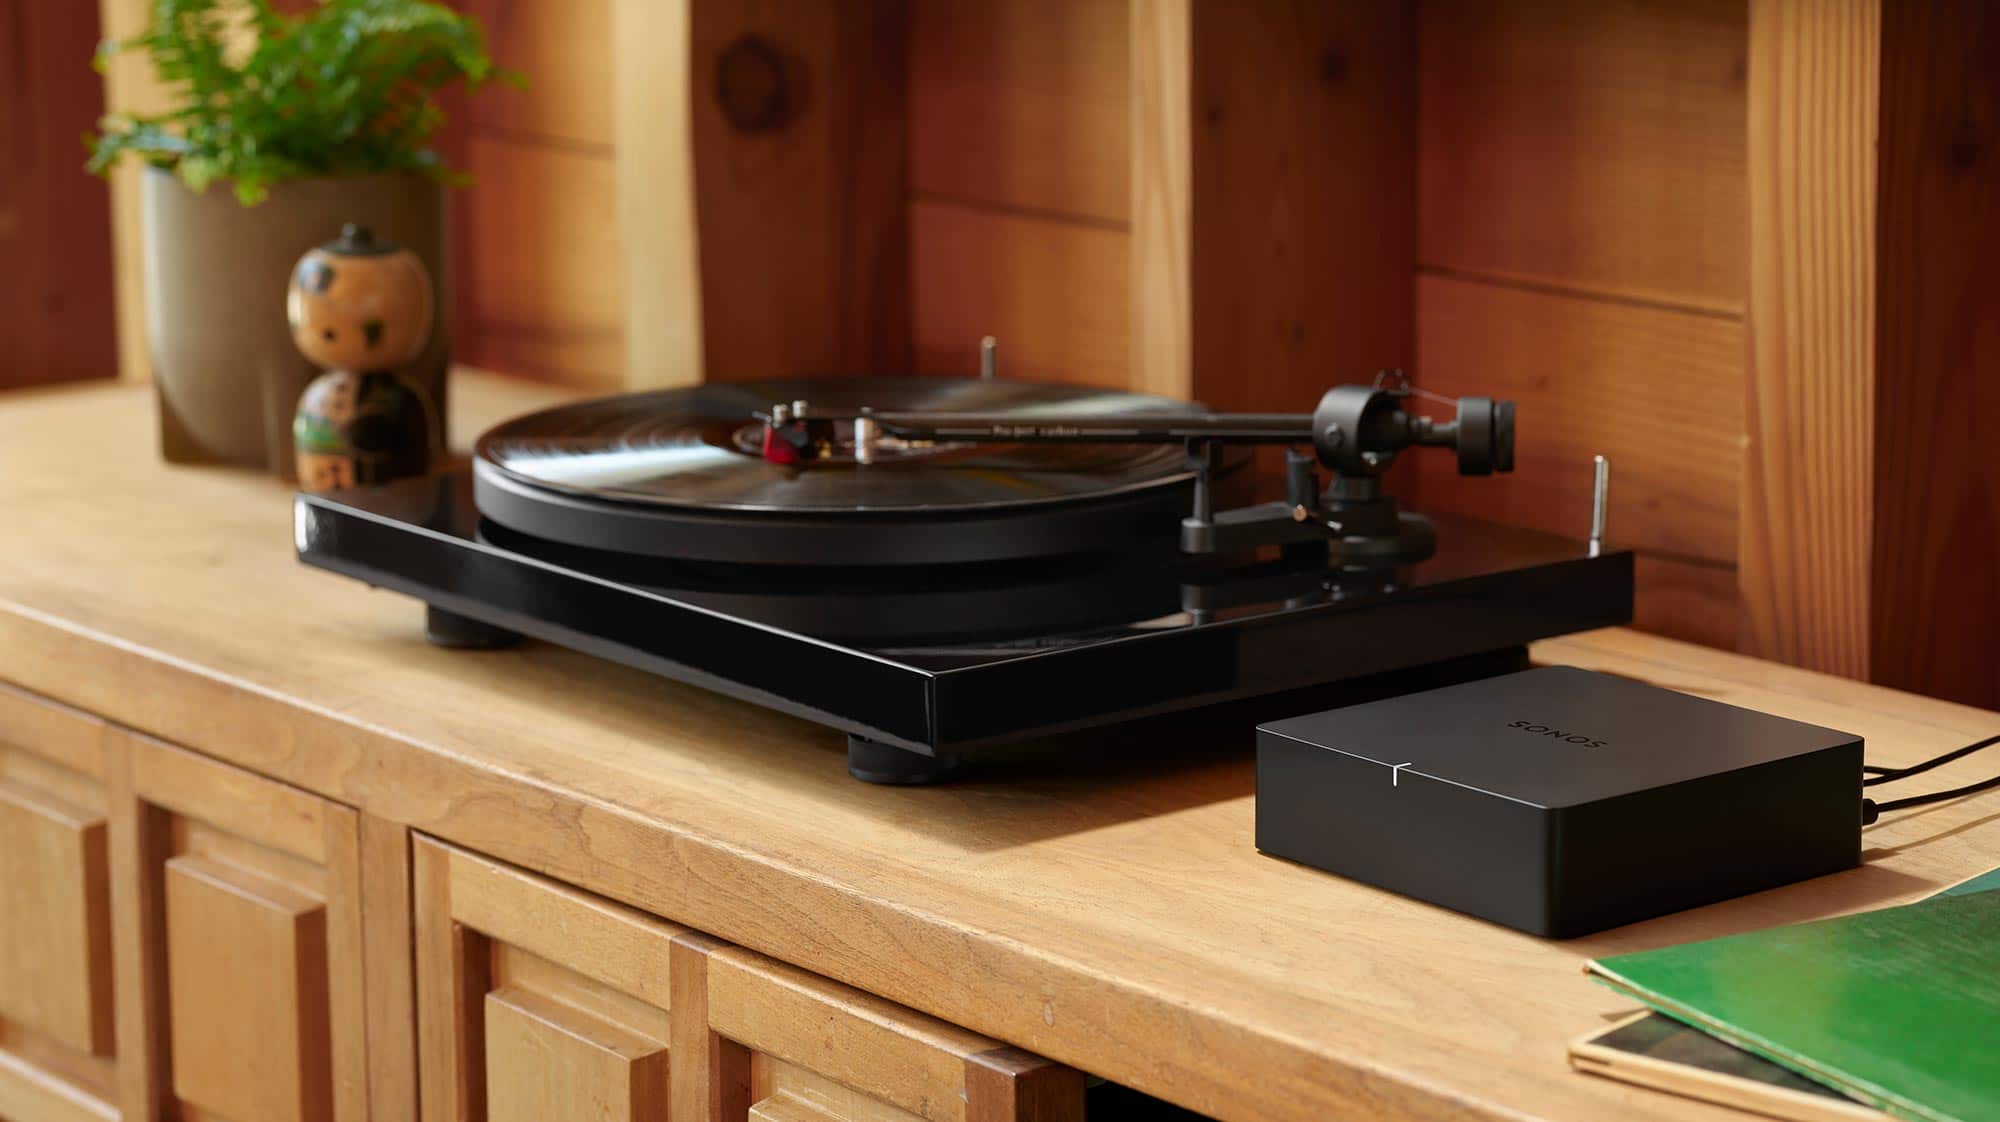 How can you share vinyl across home? – Pickr